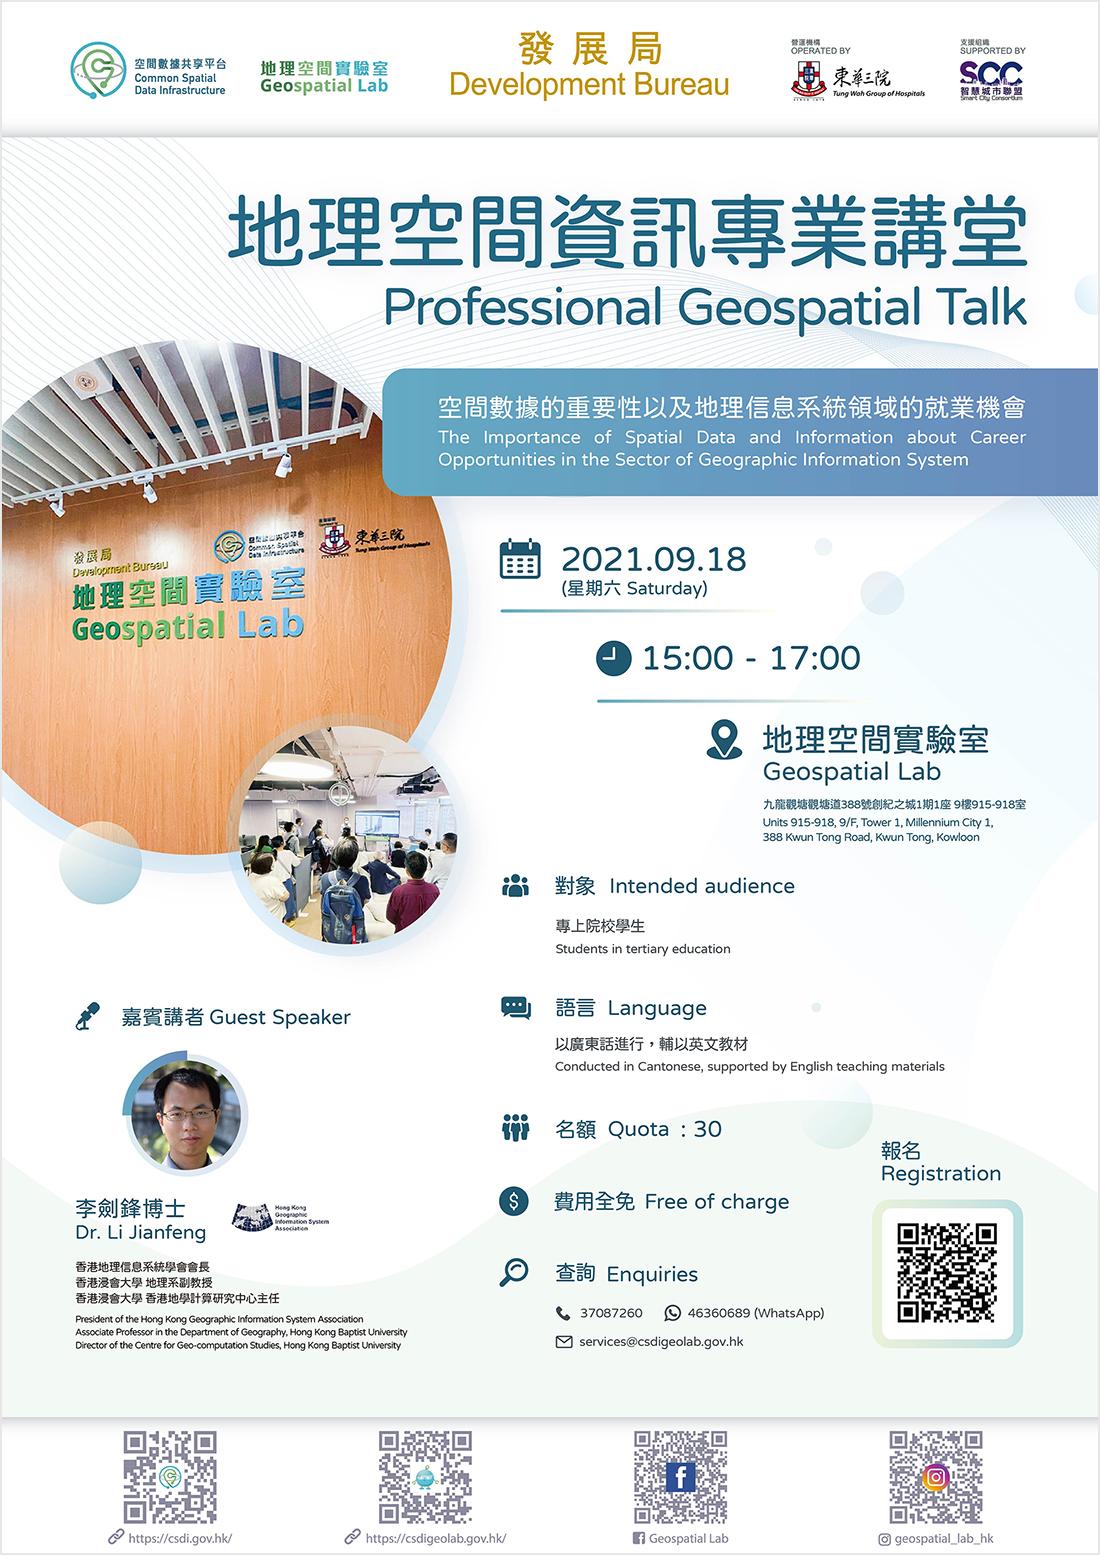 Poster of Professional Geospatial Talk - The Importance of Spatial Data and Information about Career Opportunities in the Sector of Geographic Information System